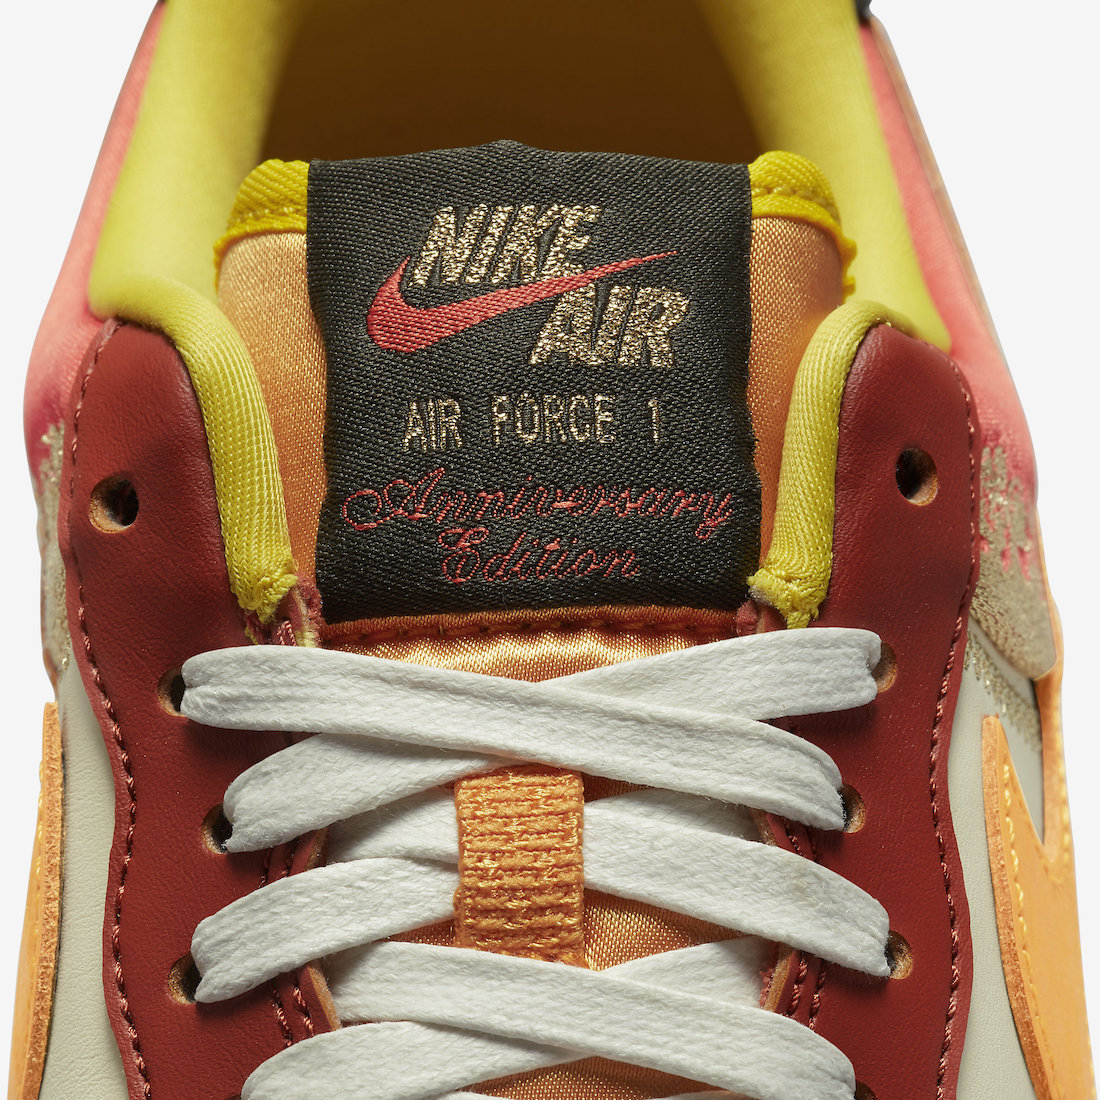 Nike Air Force 1 Low Little Accra DV4463-600 Release Date